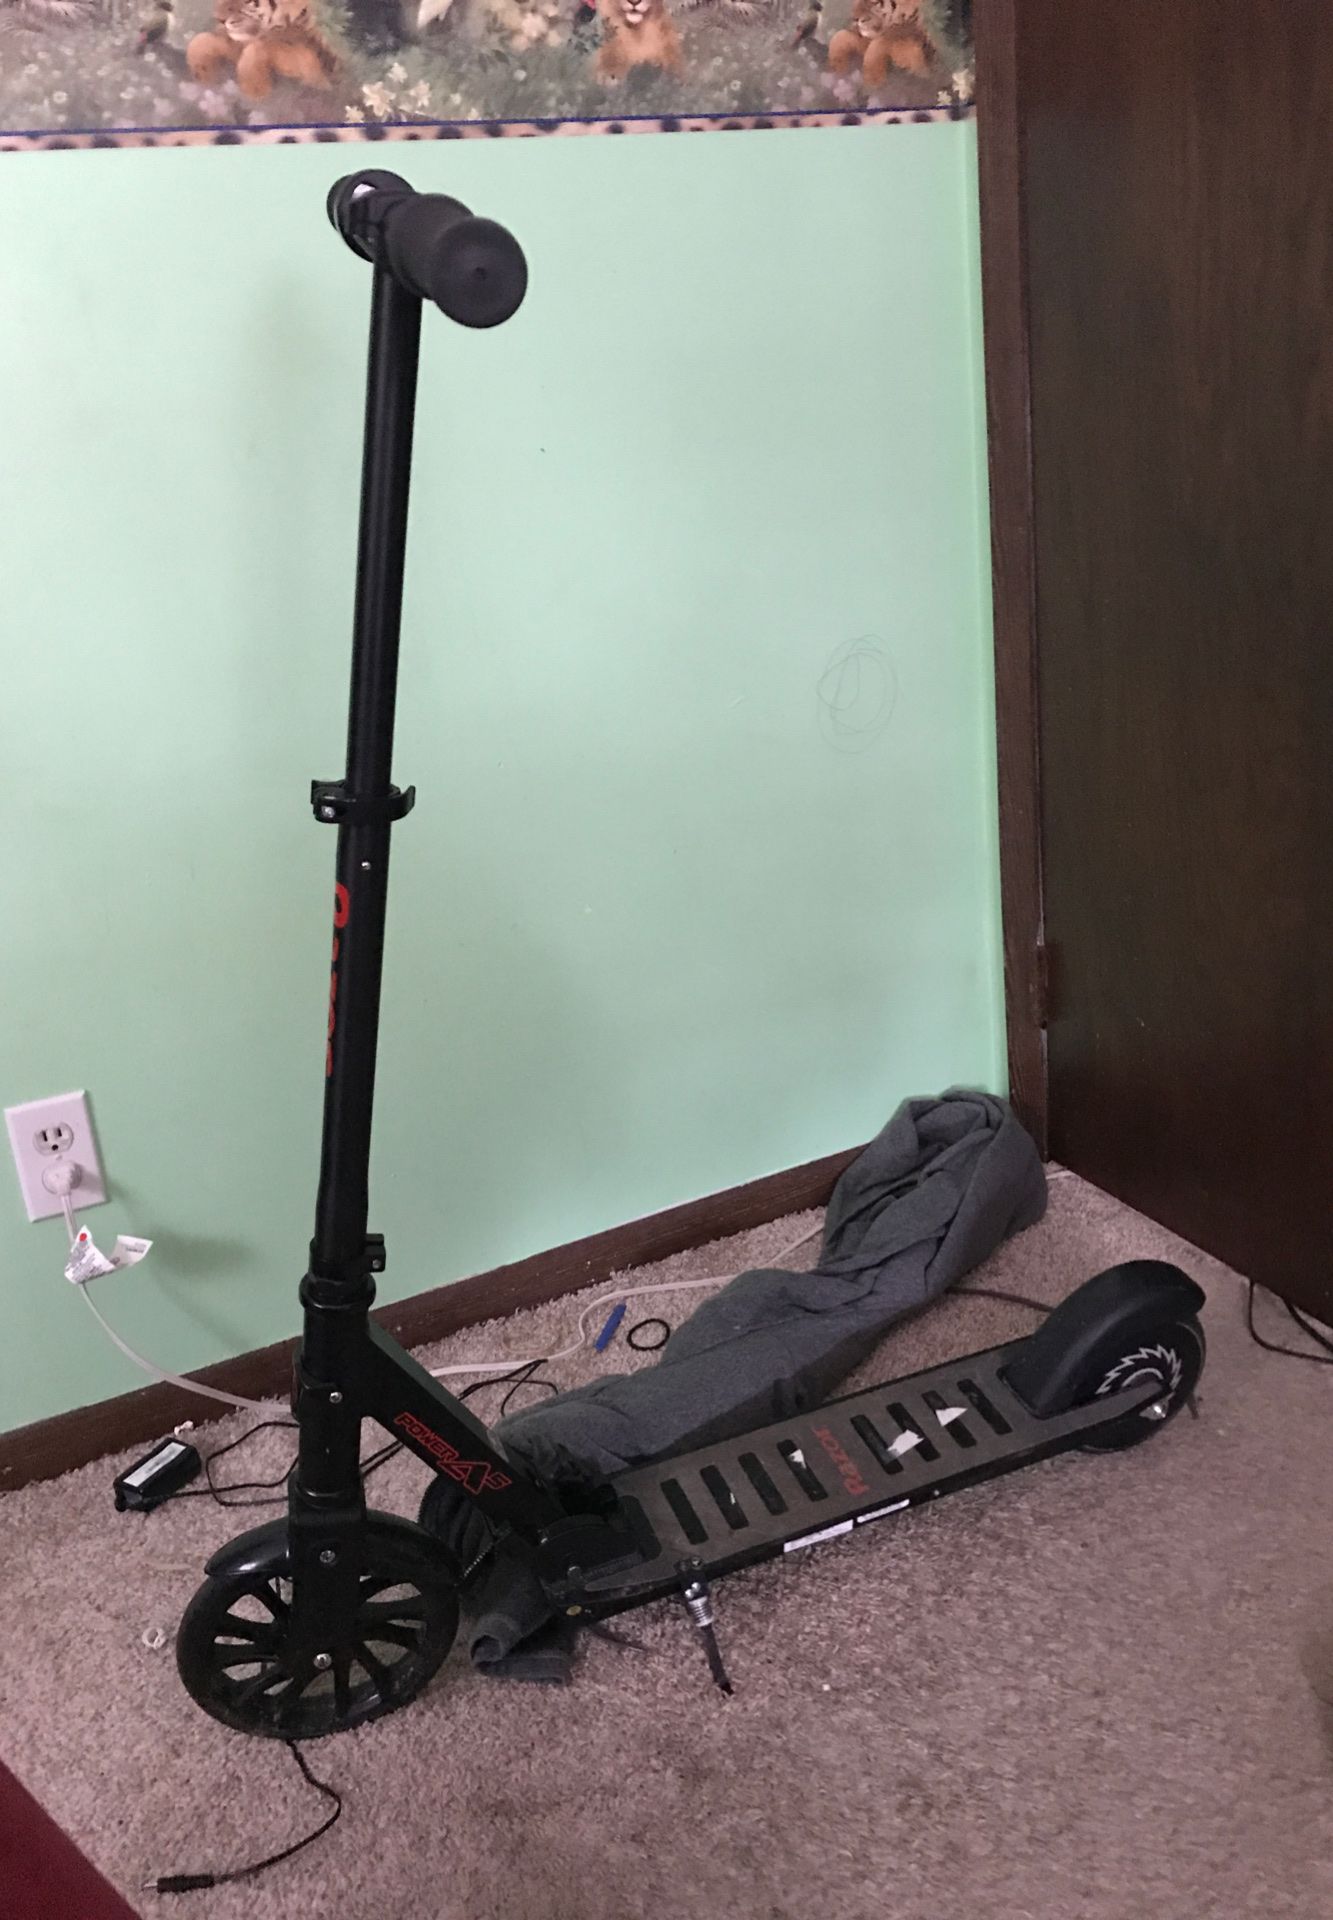 This is a razor scooter it is electric comes with a charger and will trade for PS4